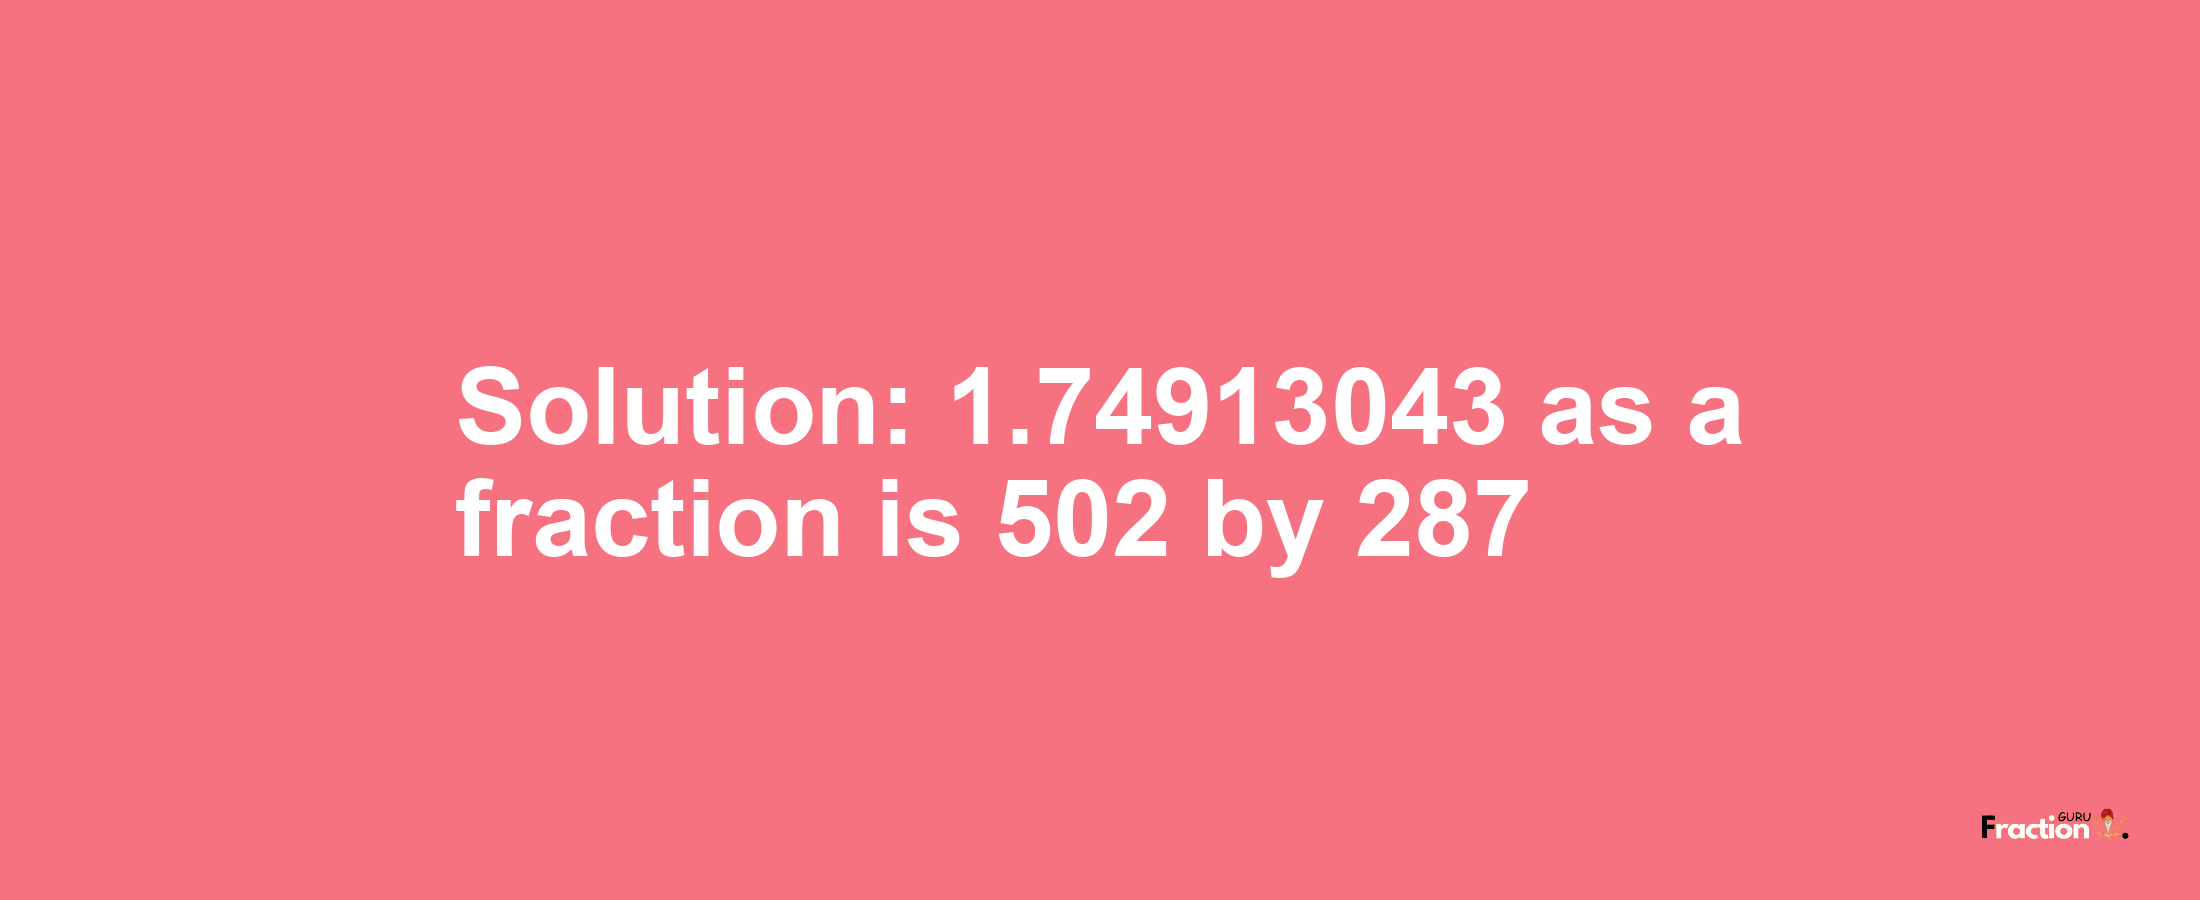 Solution:1.74913043 as a fraction is 502/287